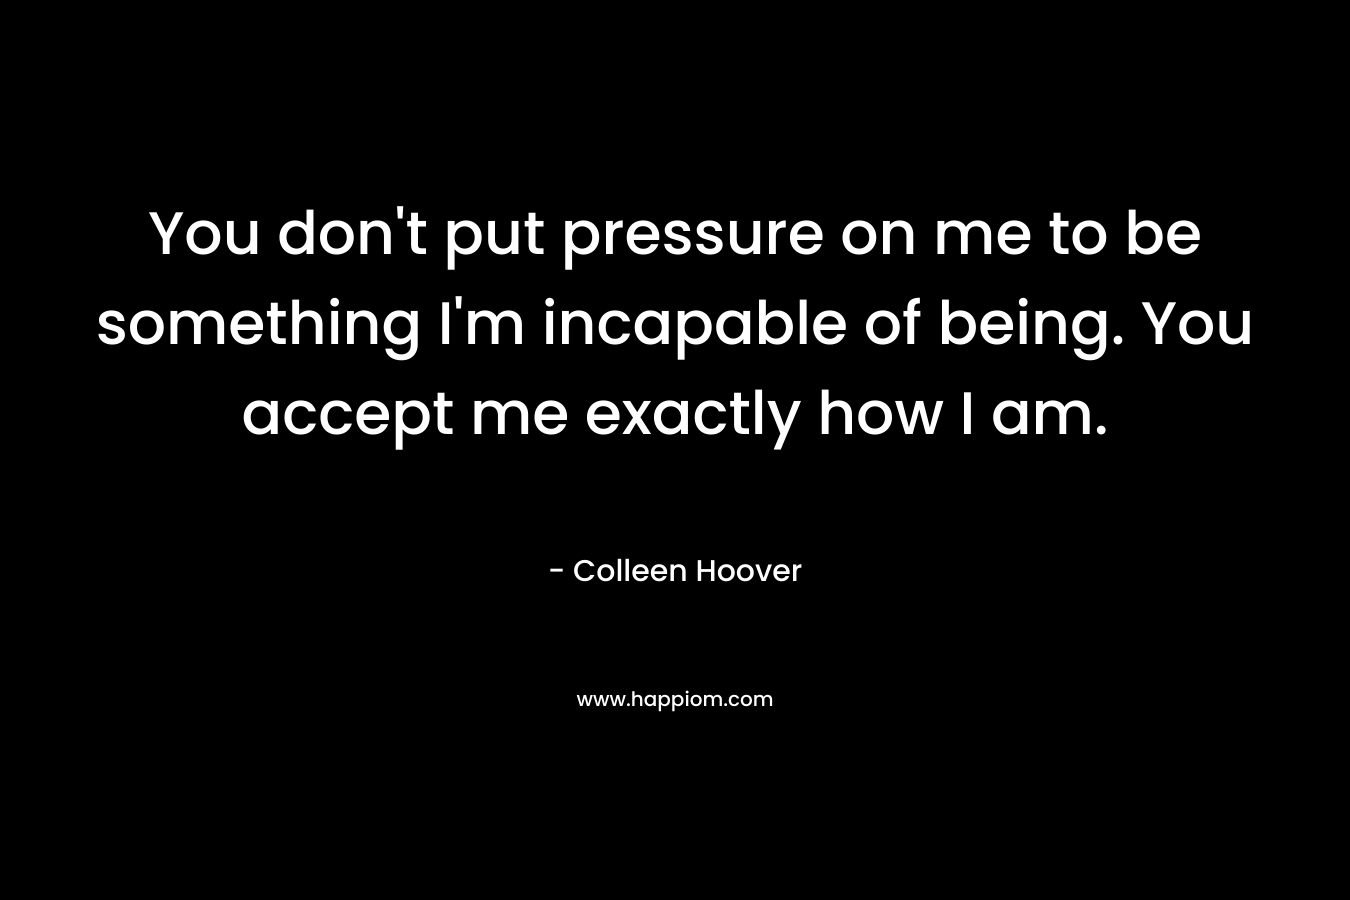 You don't put pressure on me to be something I'm incapable of being. You accept me exactly how I am.